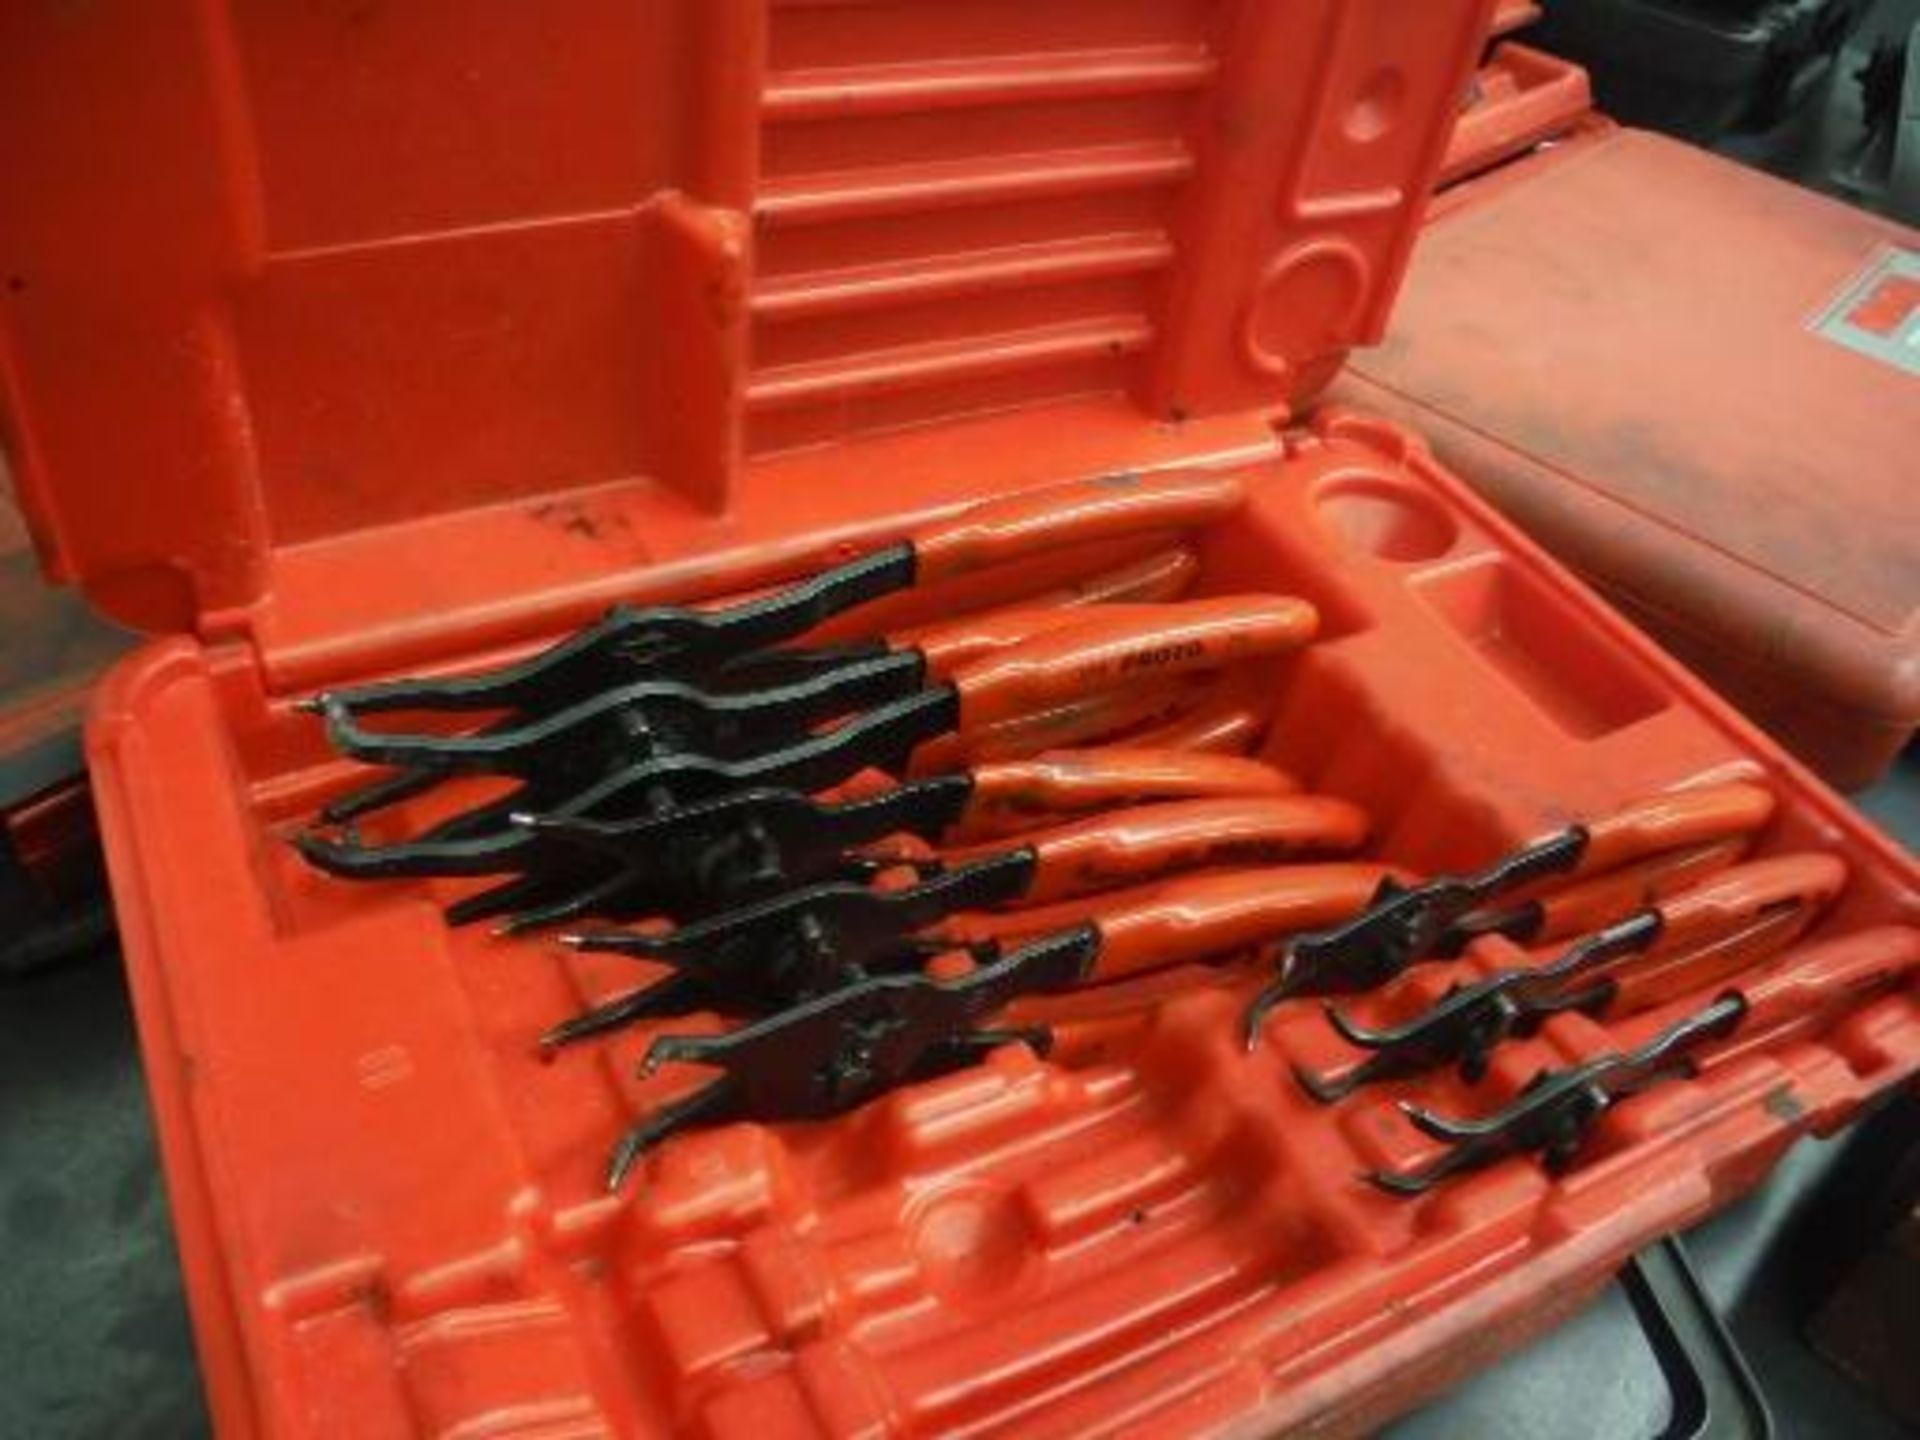 Proto retaining ring pliers set in case. Located in Marion, Ohio Rigging Fee: $25